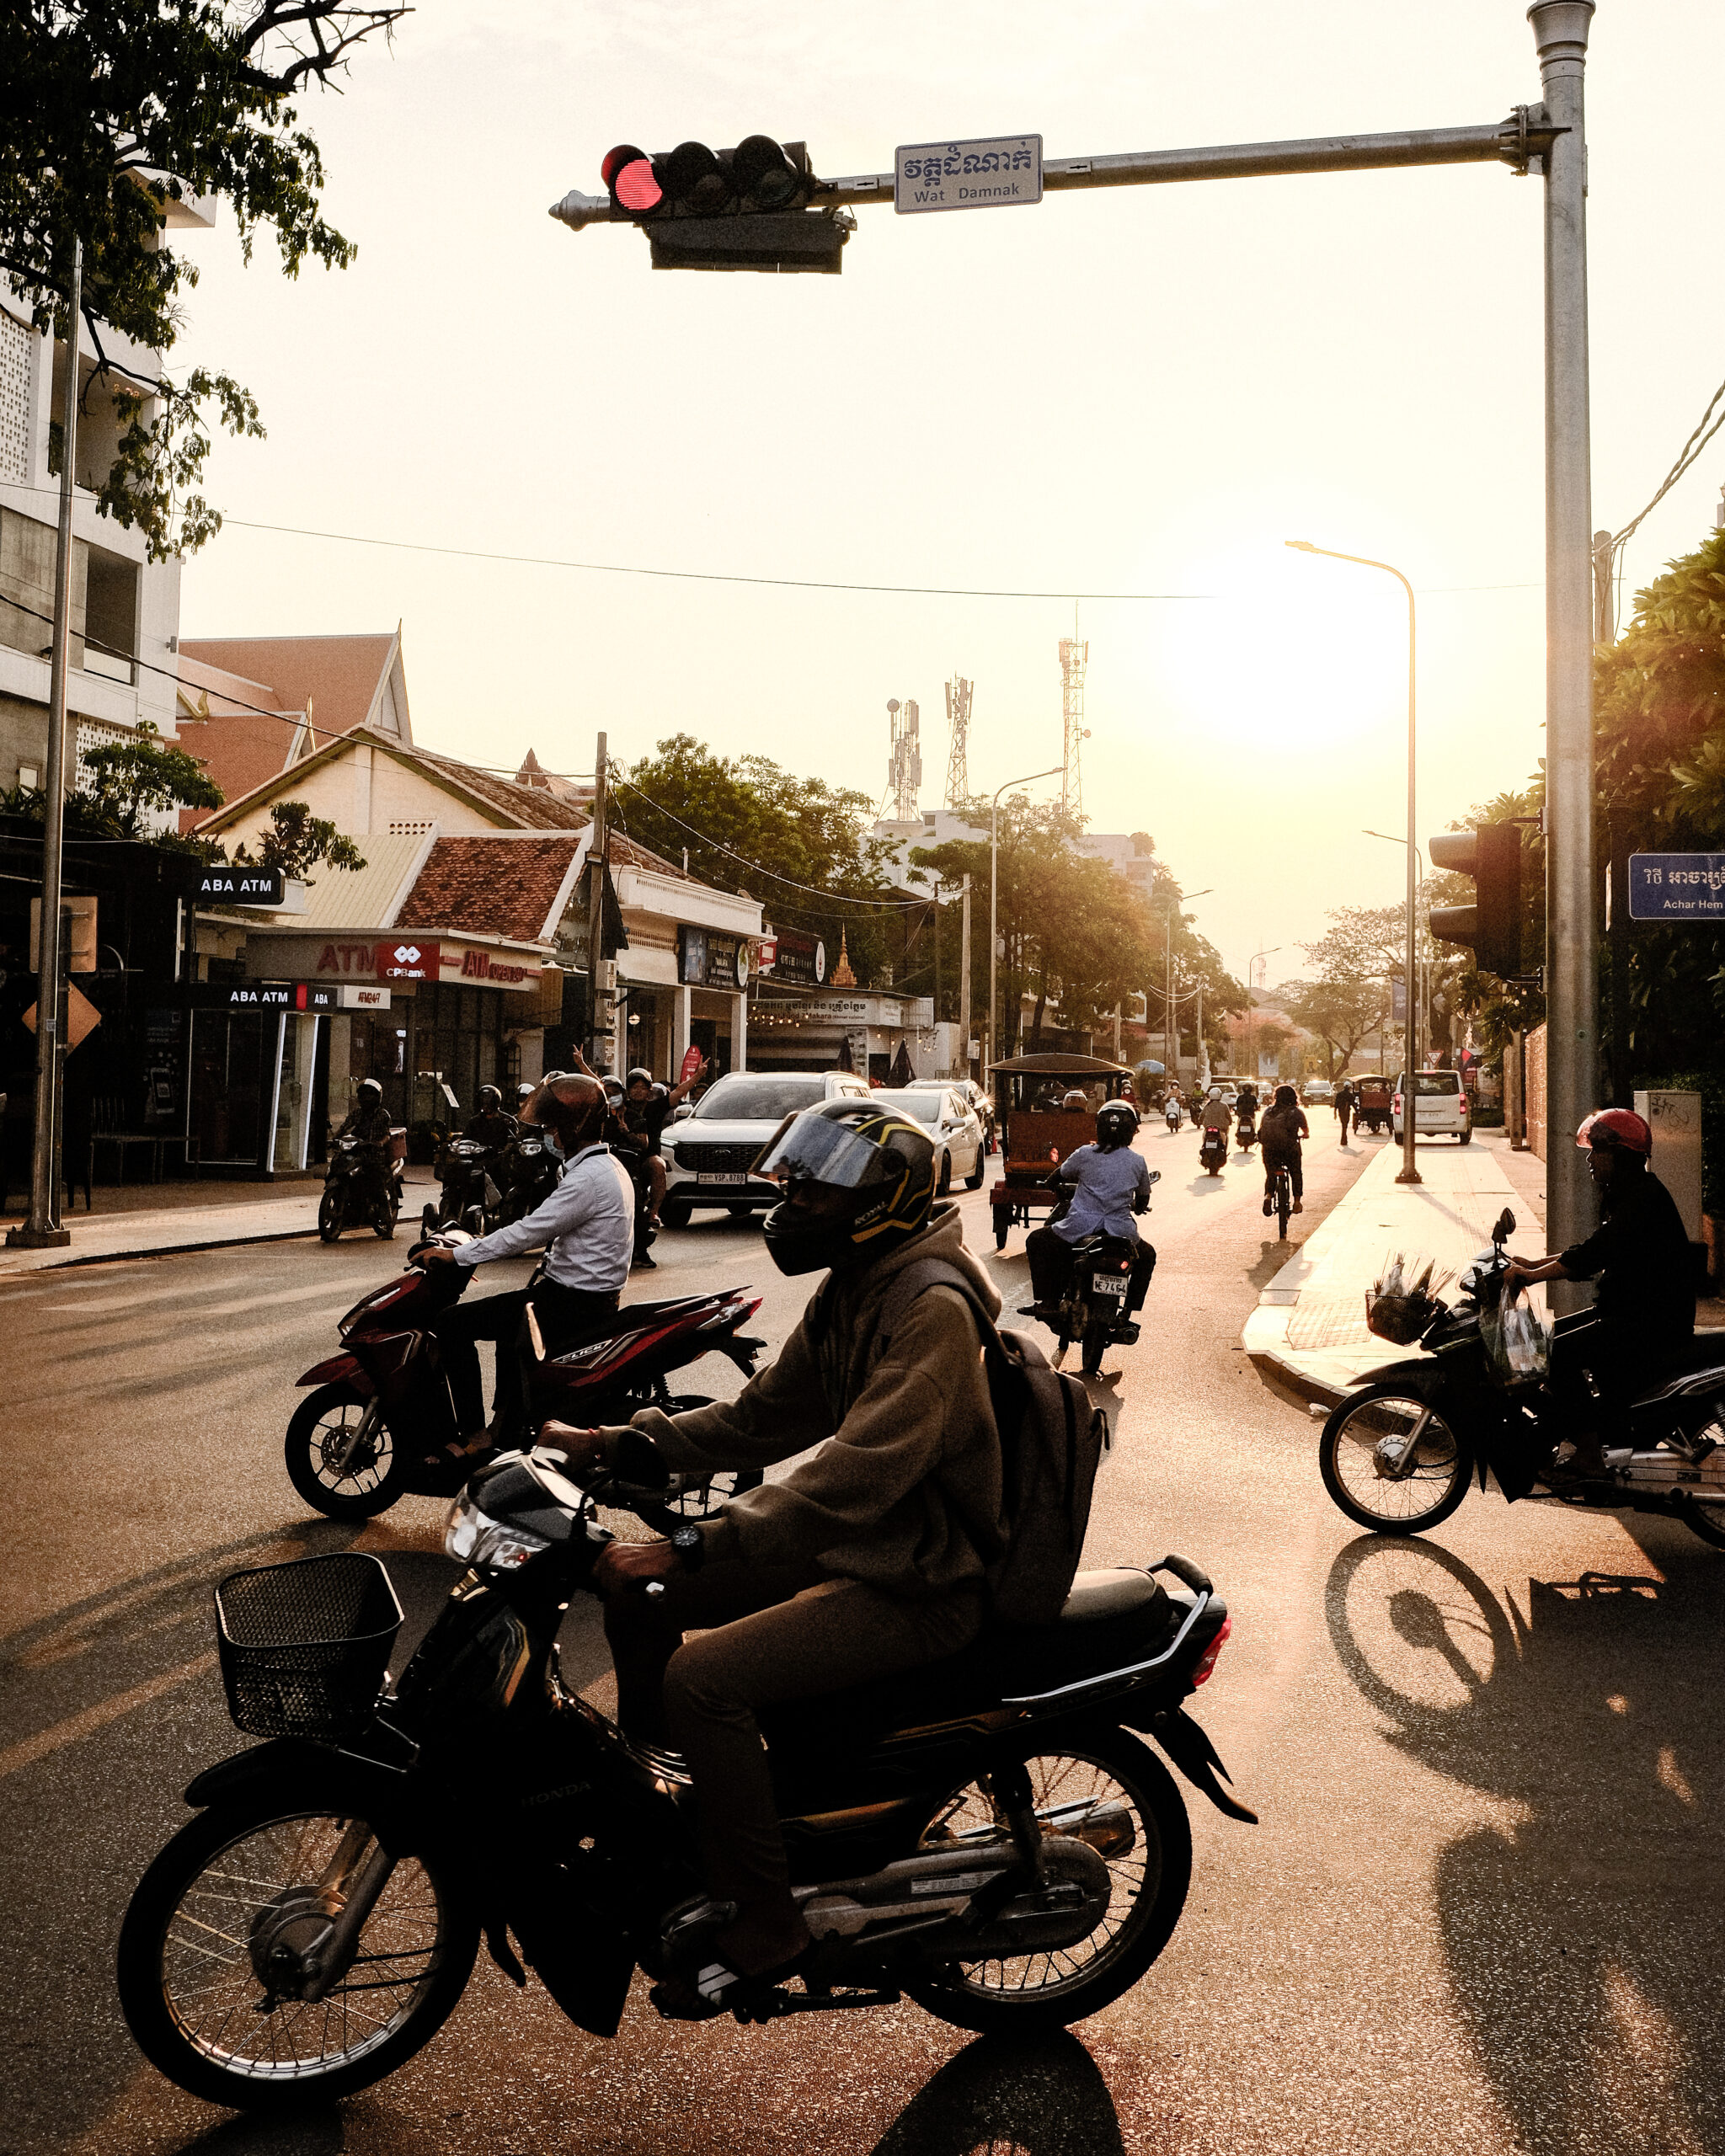 Motorbikes on a busy street in Siem Reap, Cambodia